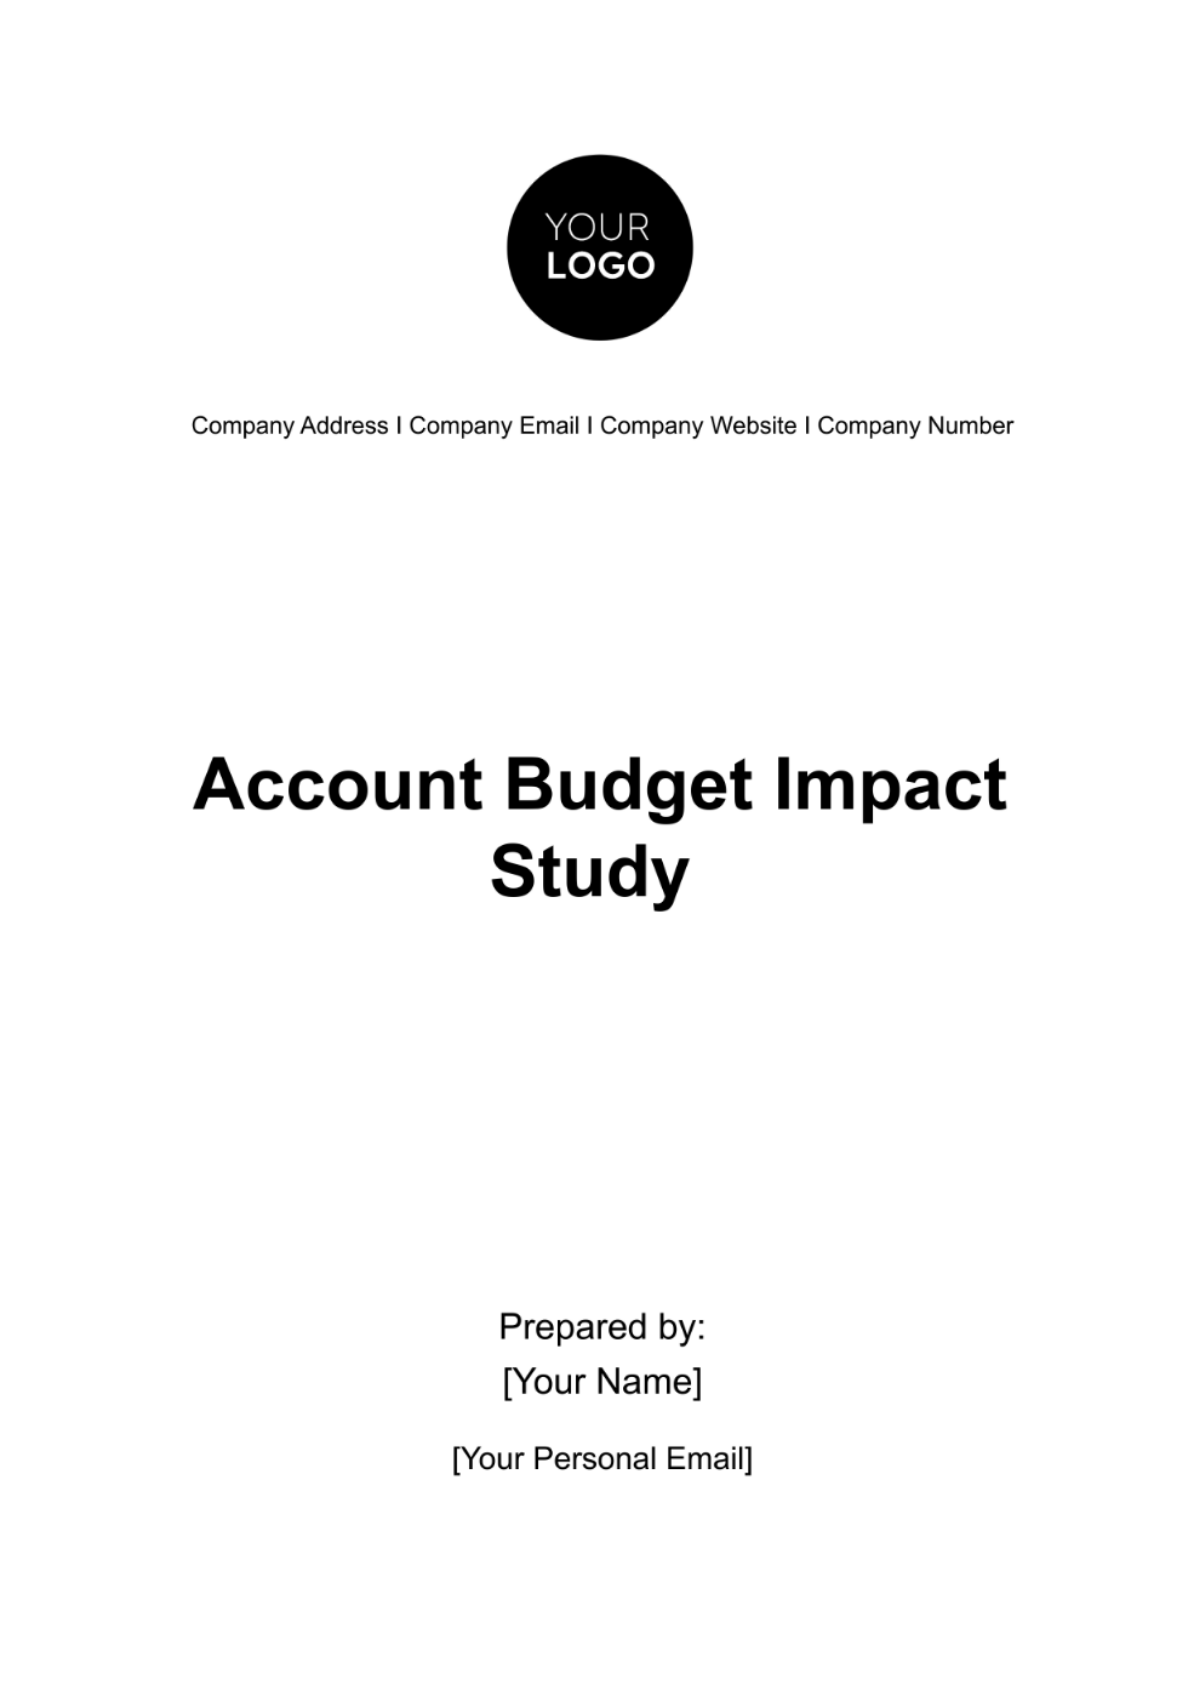 Account Budget Impact Study Template